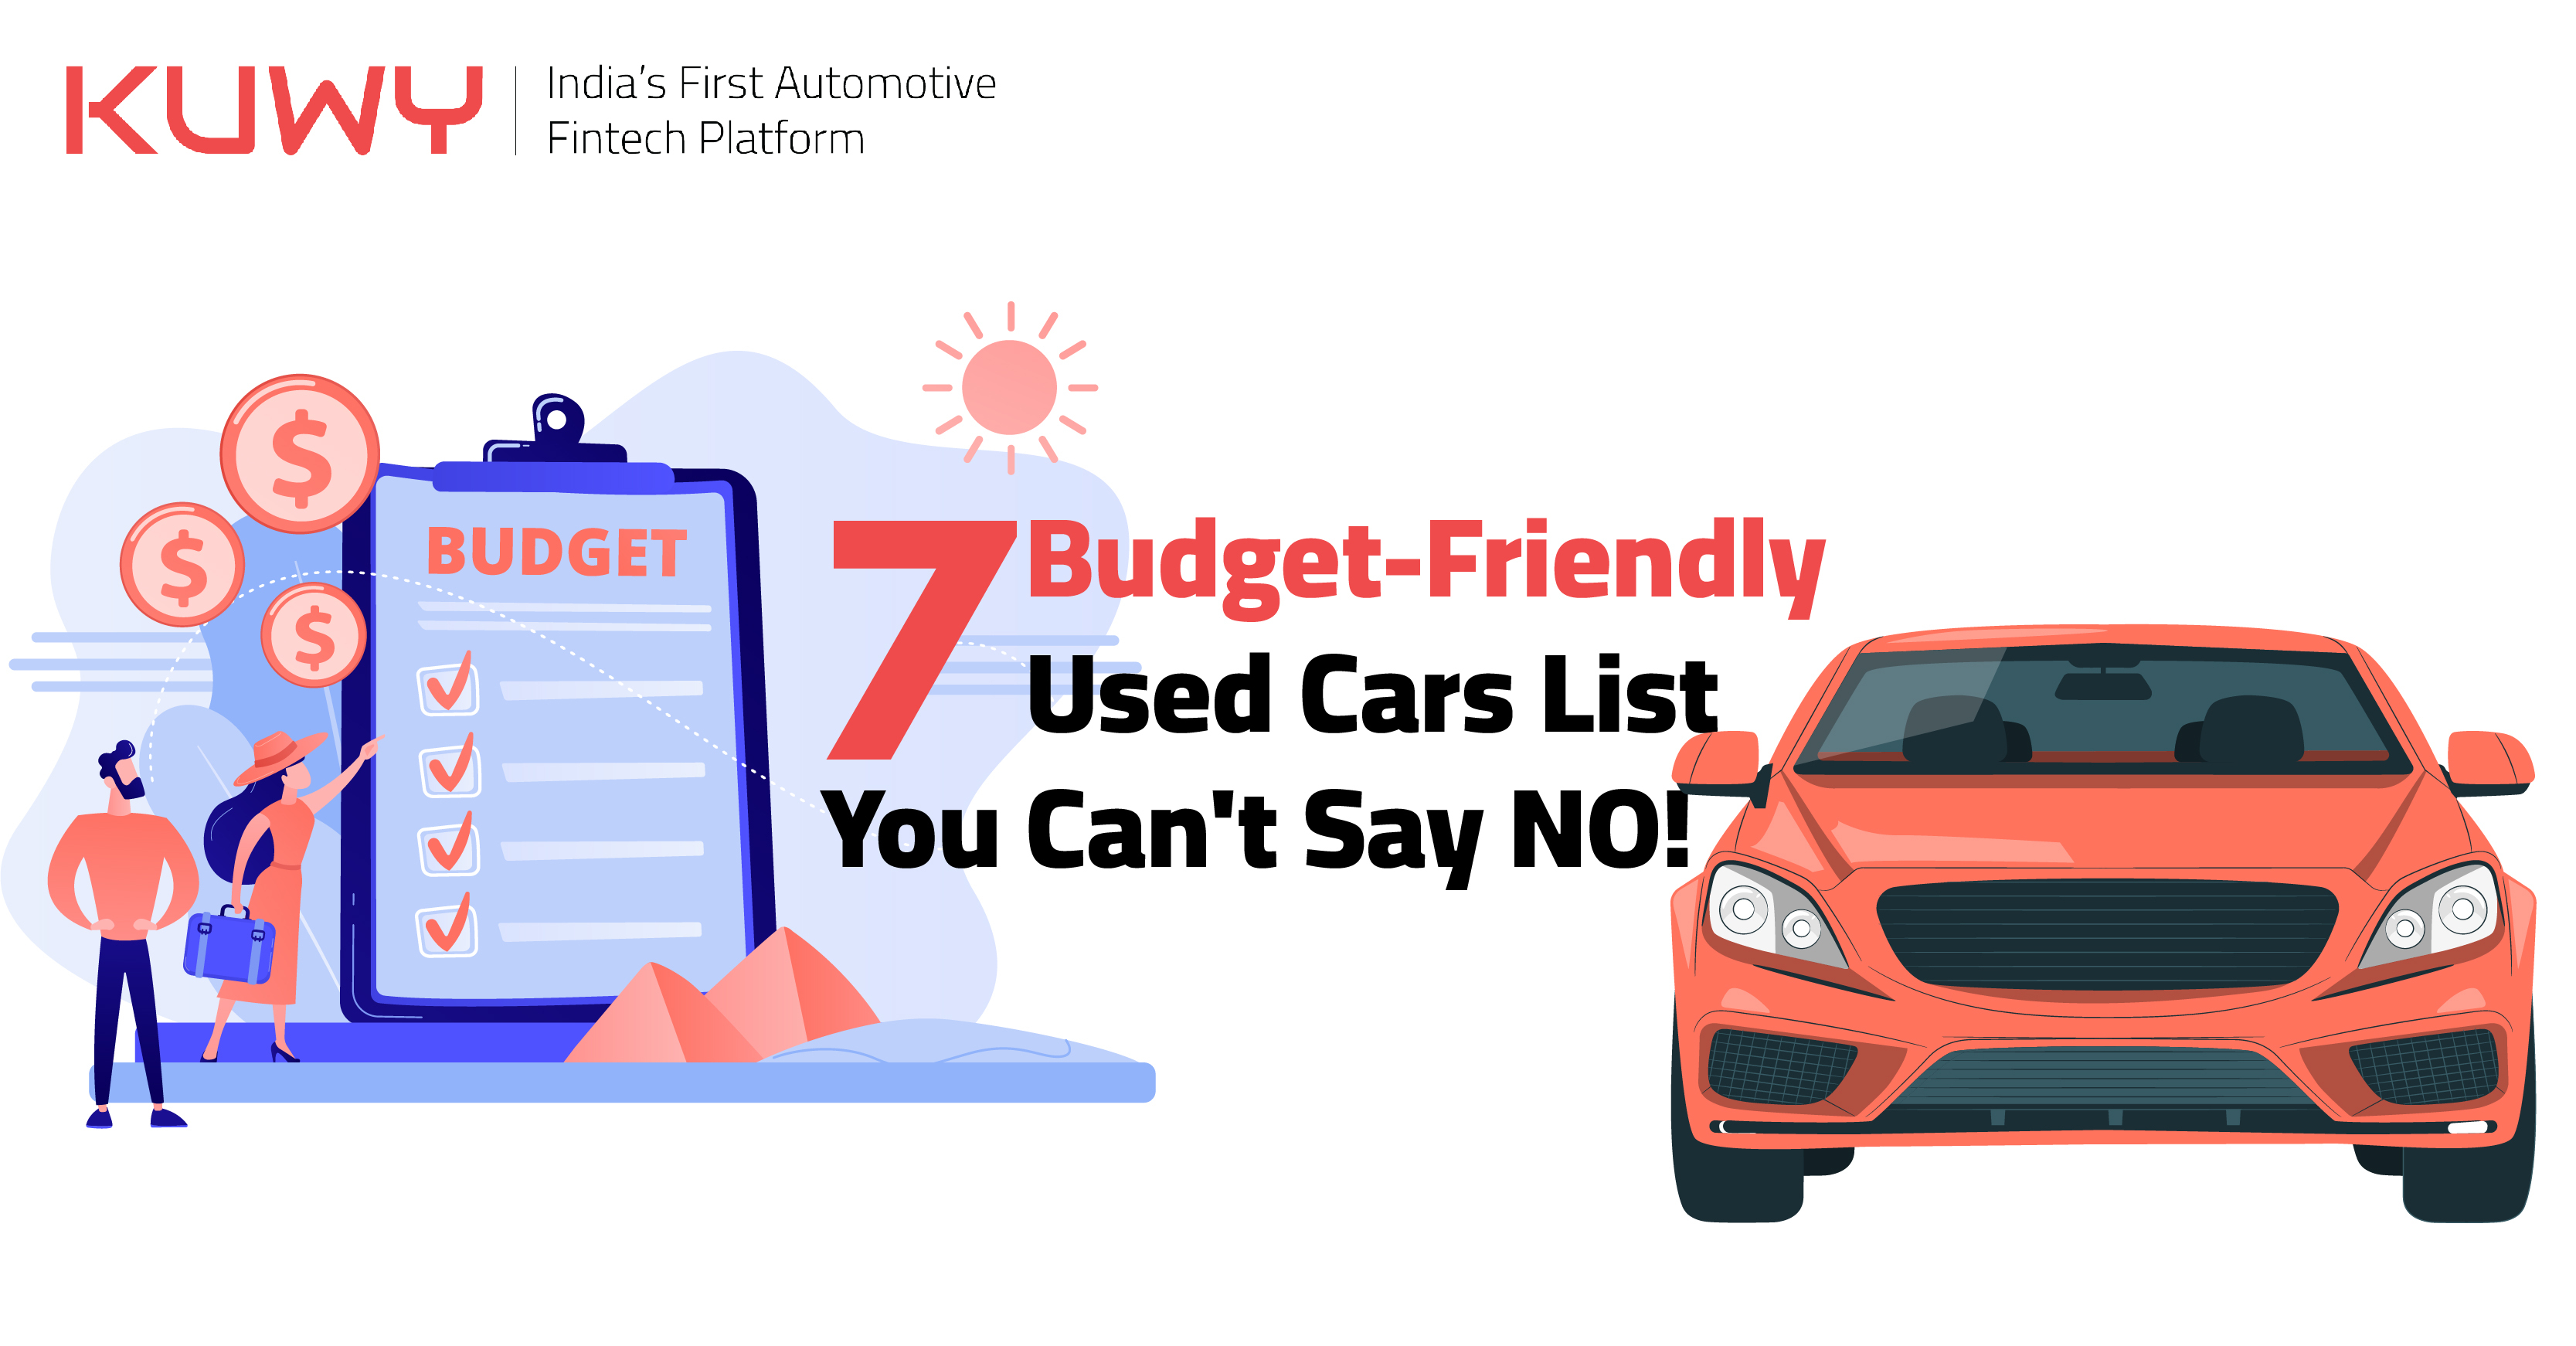 Seven Budget-Friendly Used Cars List you can't say NO!